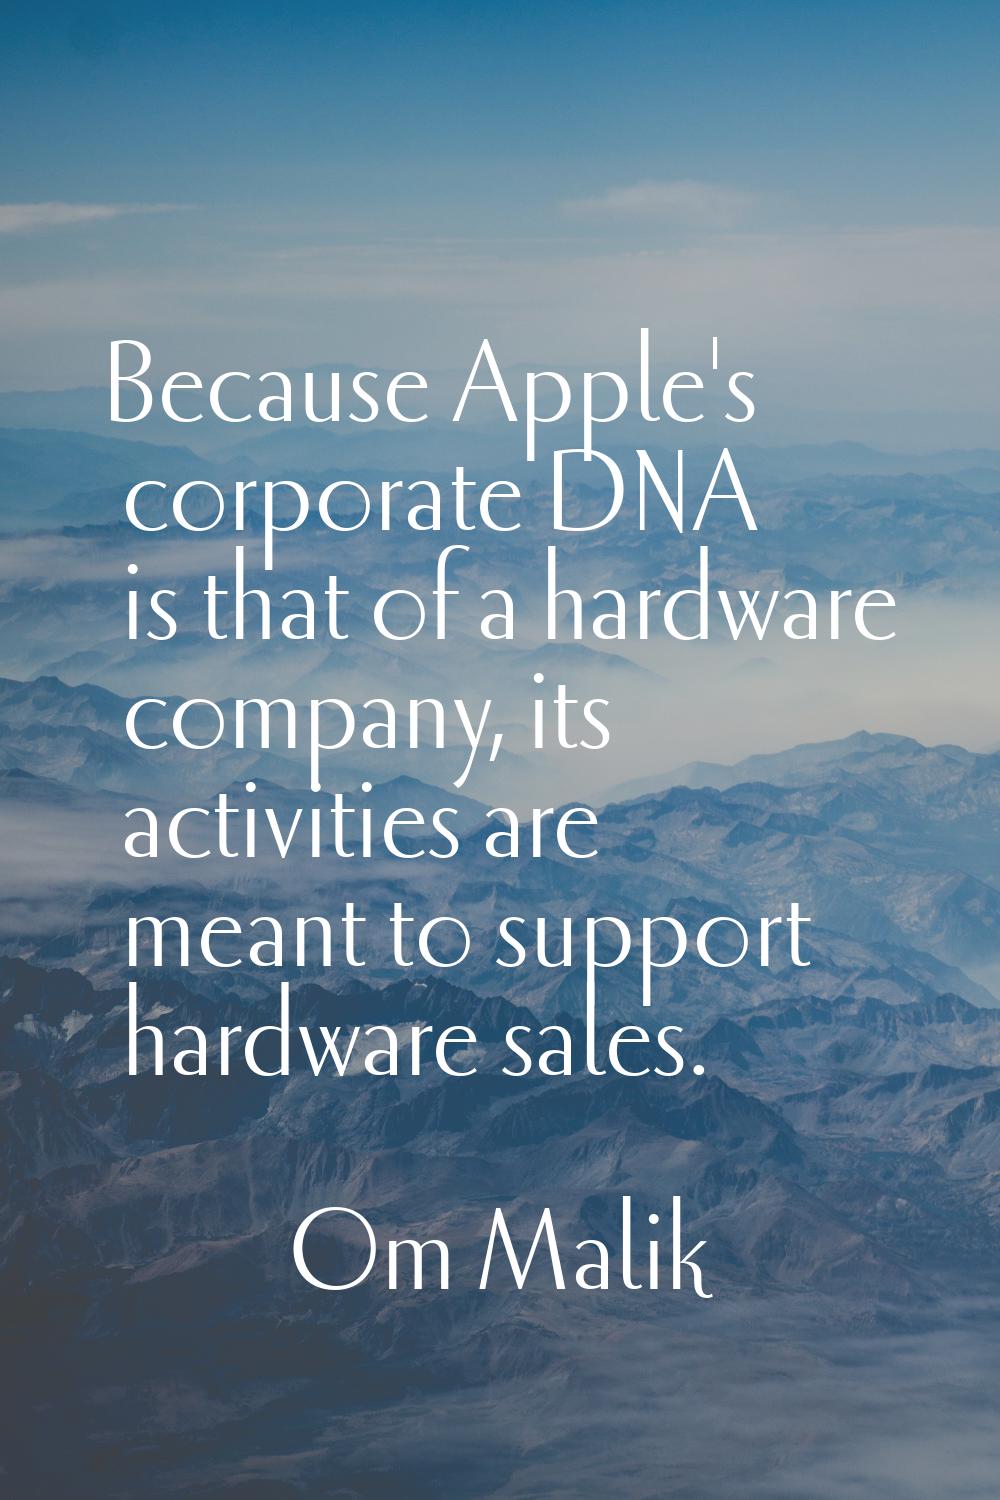 Because Apple's corporate DNA is that of a hardware company, its activities are meant to support ha